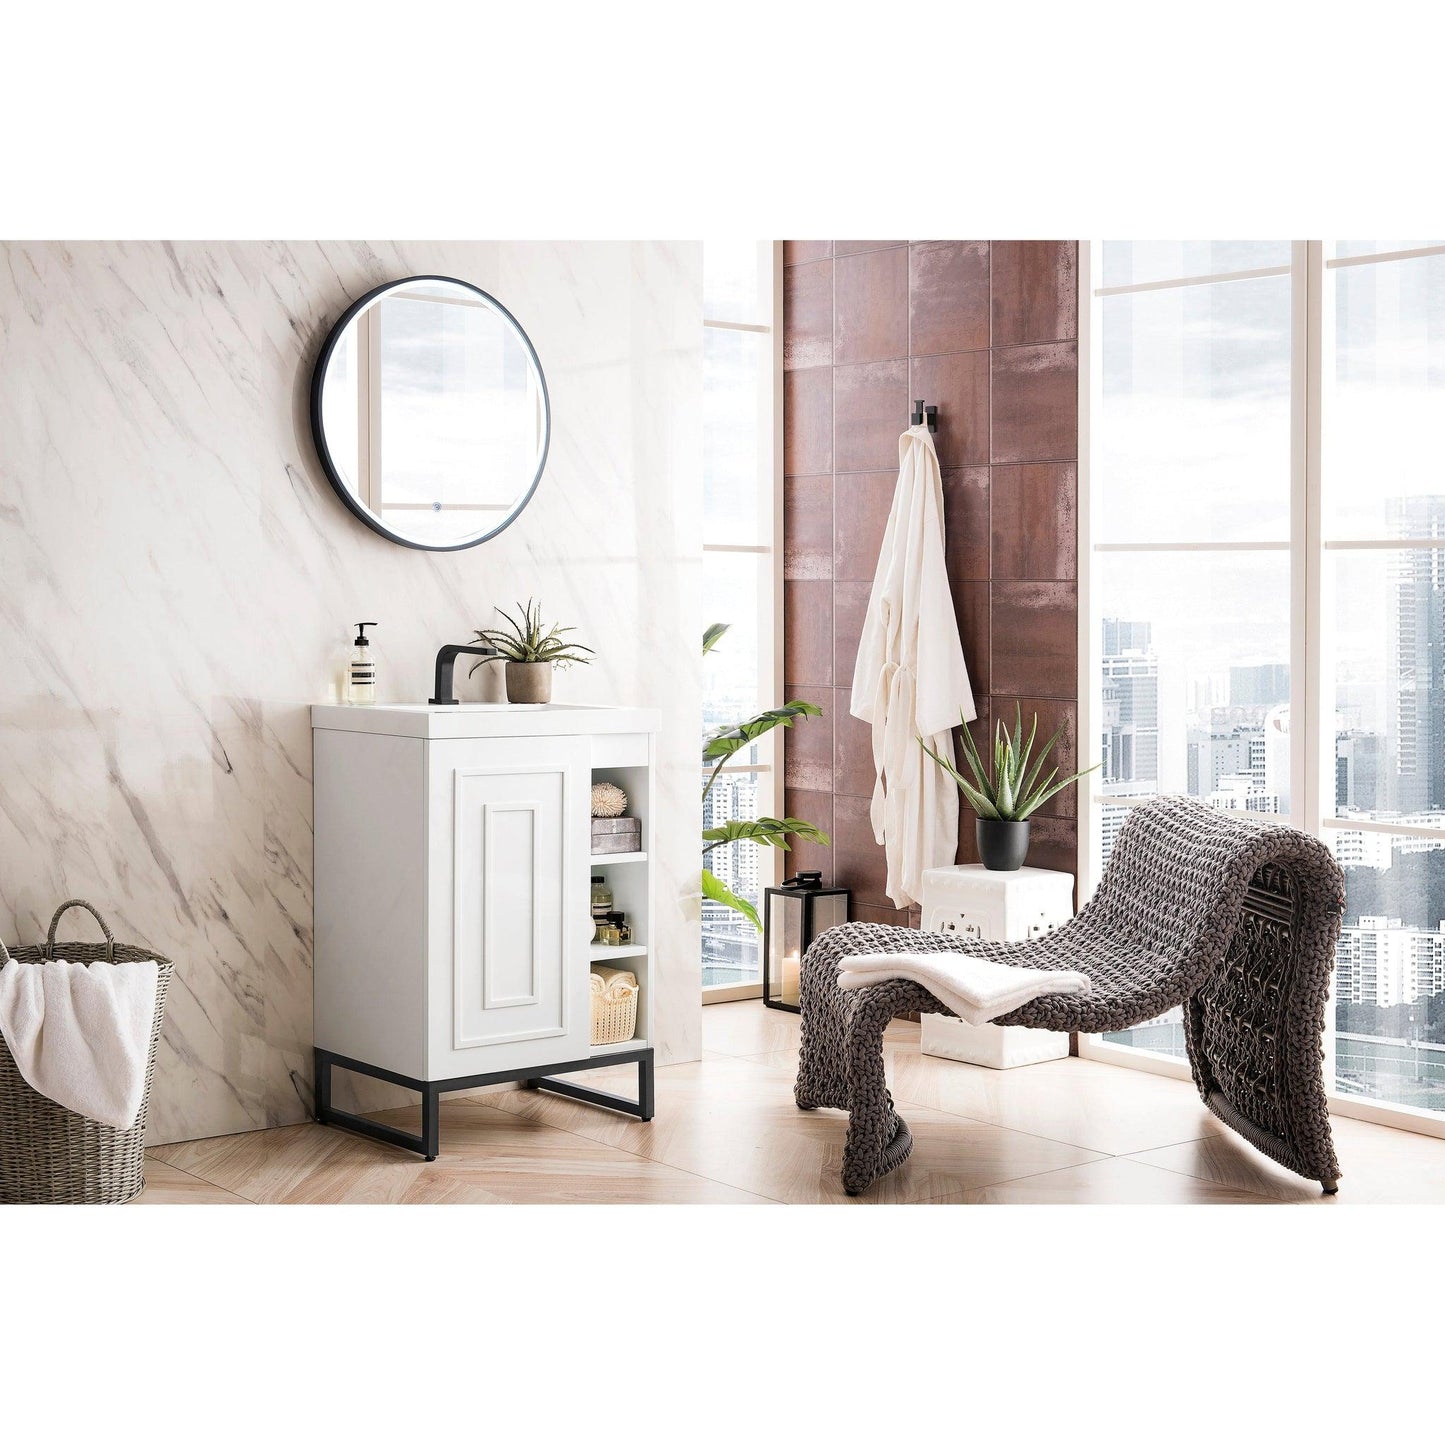 James Martin Vanities Alicante 24" Glossy White, Matte Black Single Vanity Cabinet With White Glossy Composite Countertop